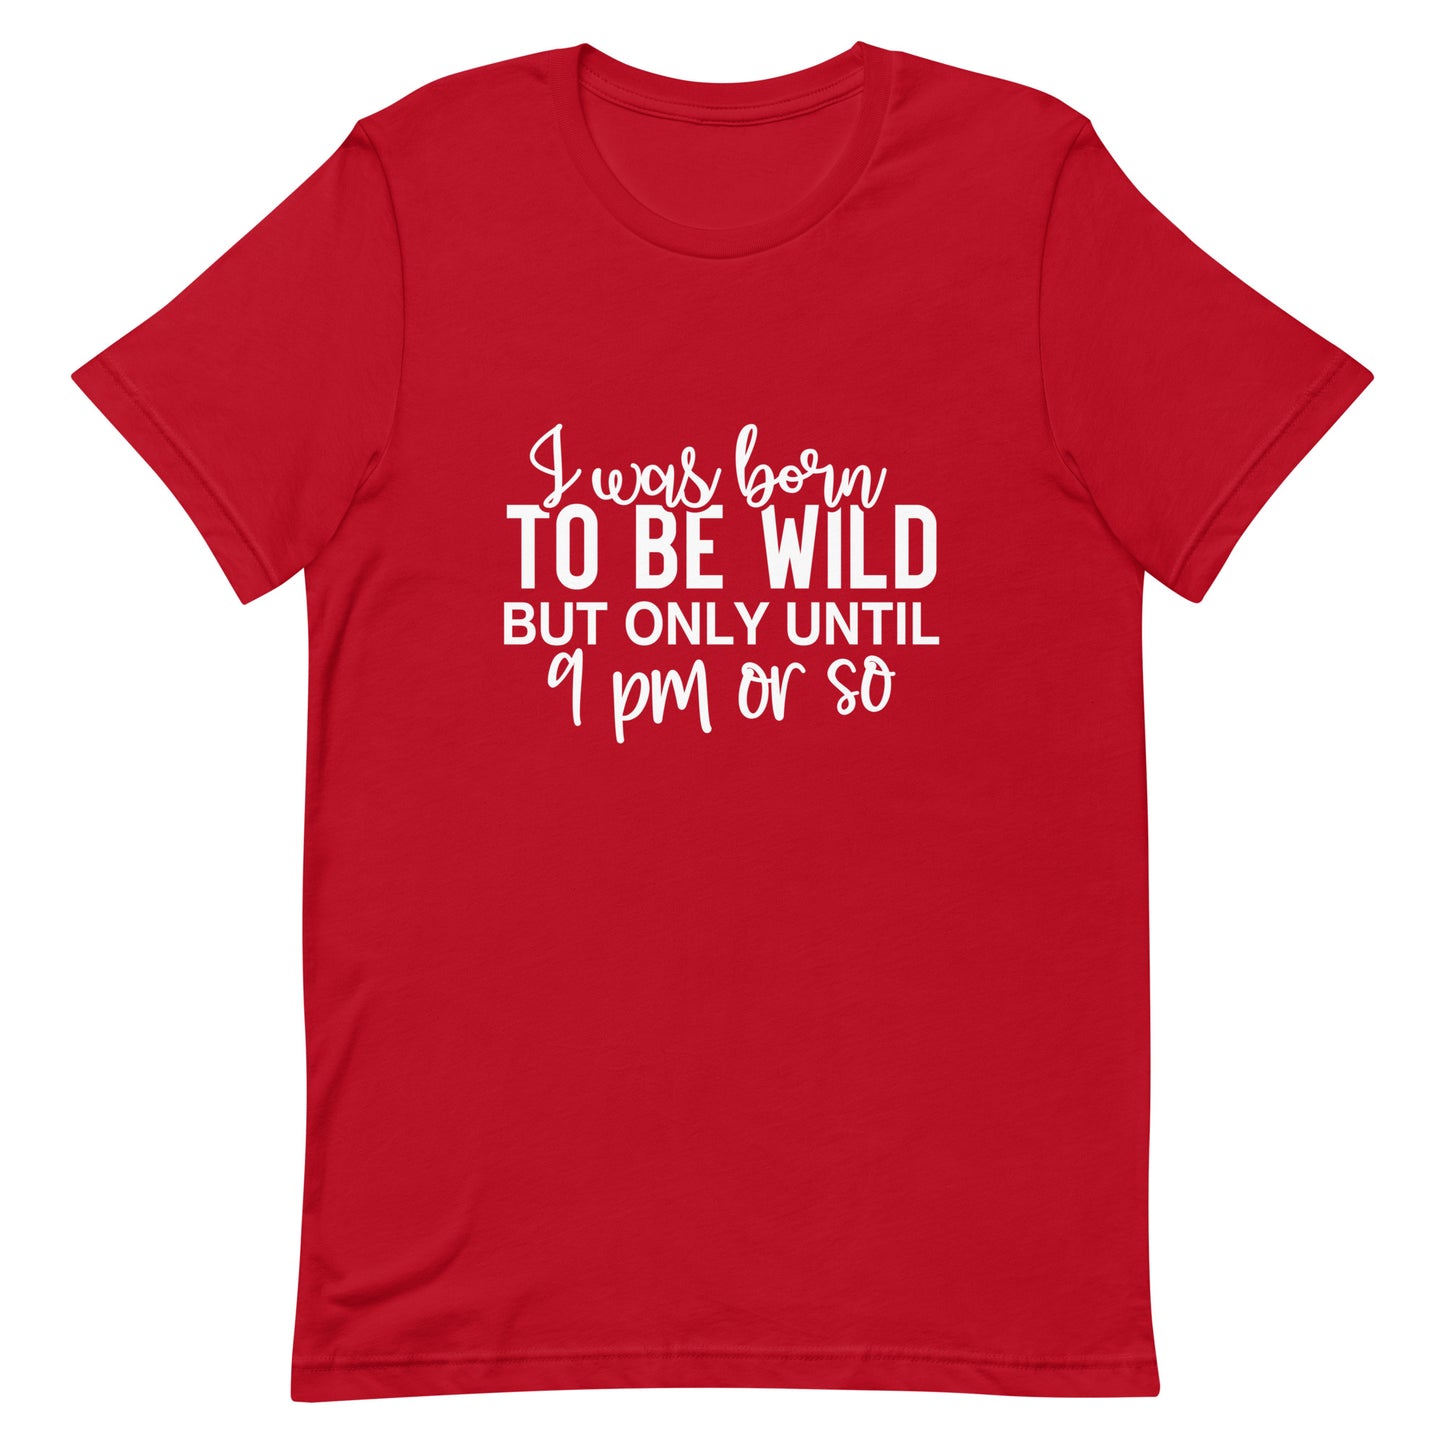 I Was Born to be Wild but Only Until 9PM or So Unisex t-shirt